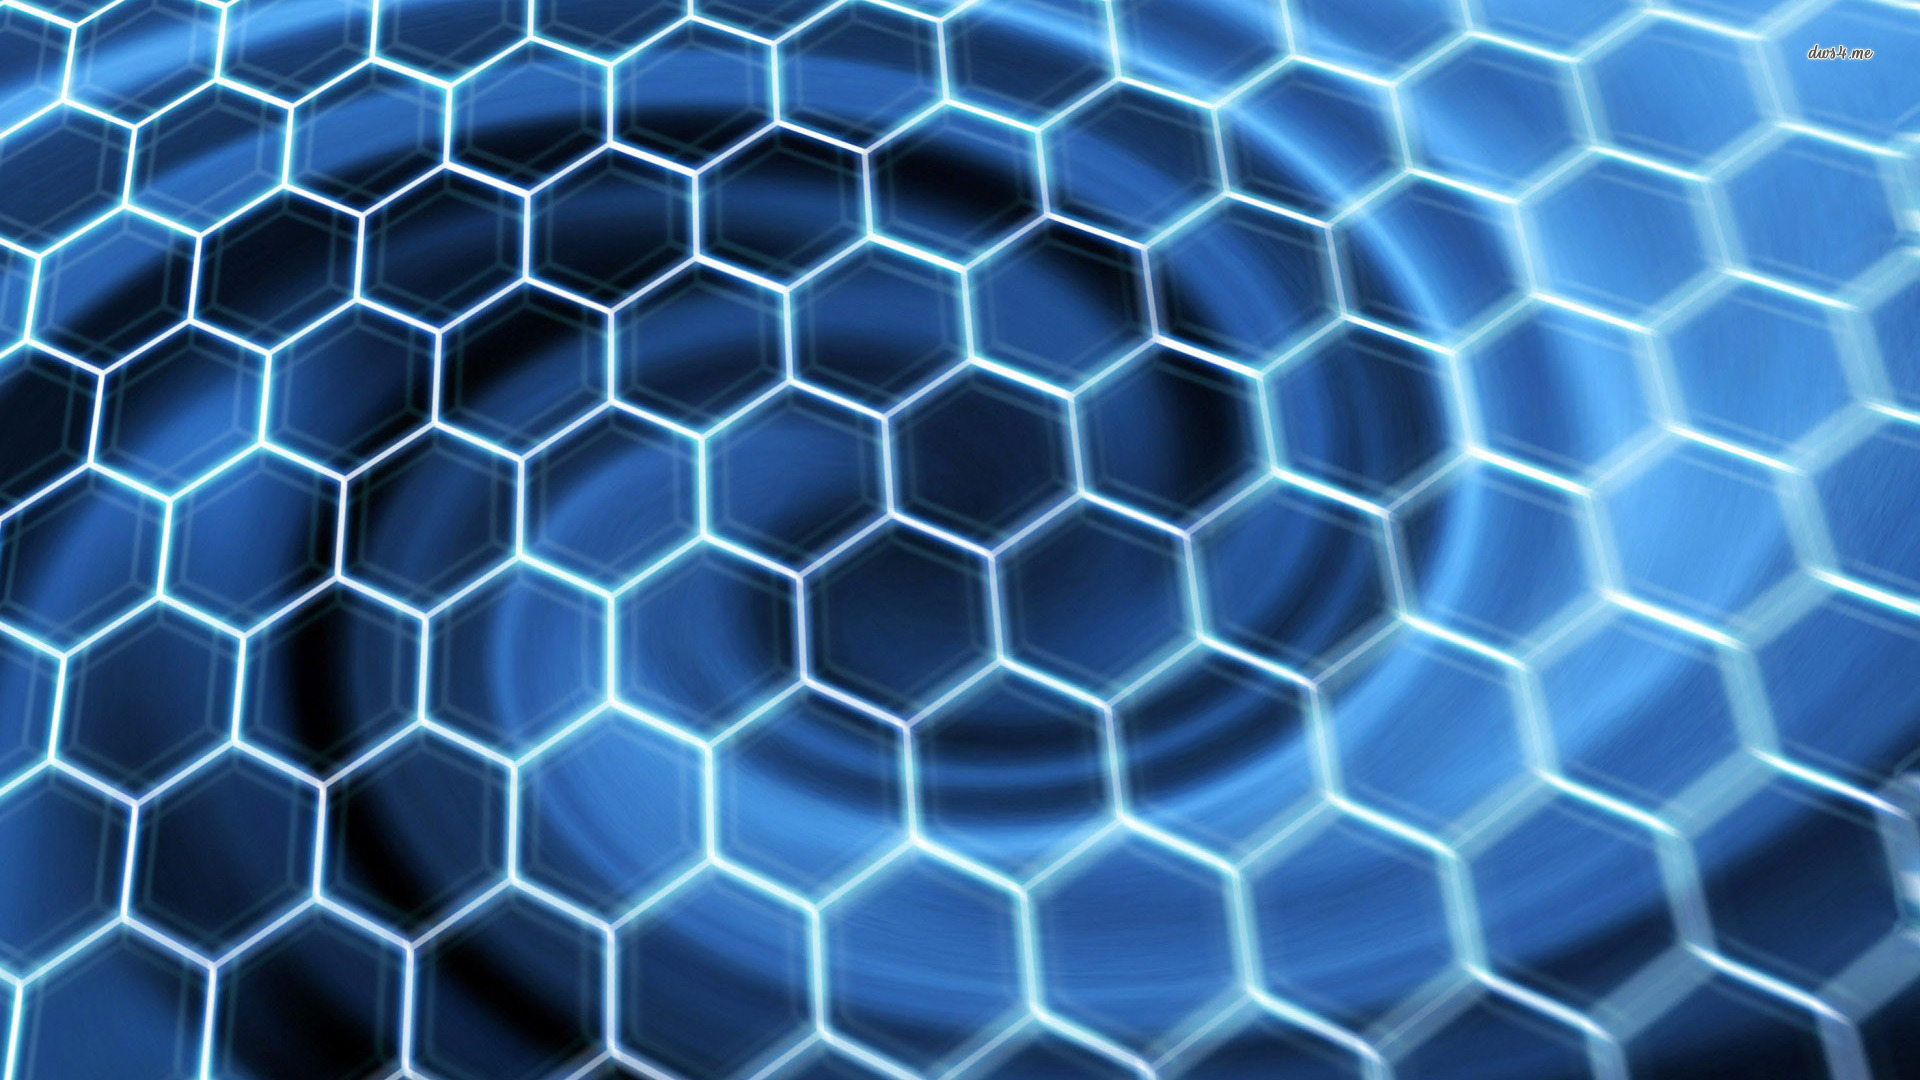 Honeycomb pattern wallpaper - Abstract wallpapers